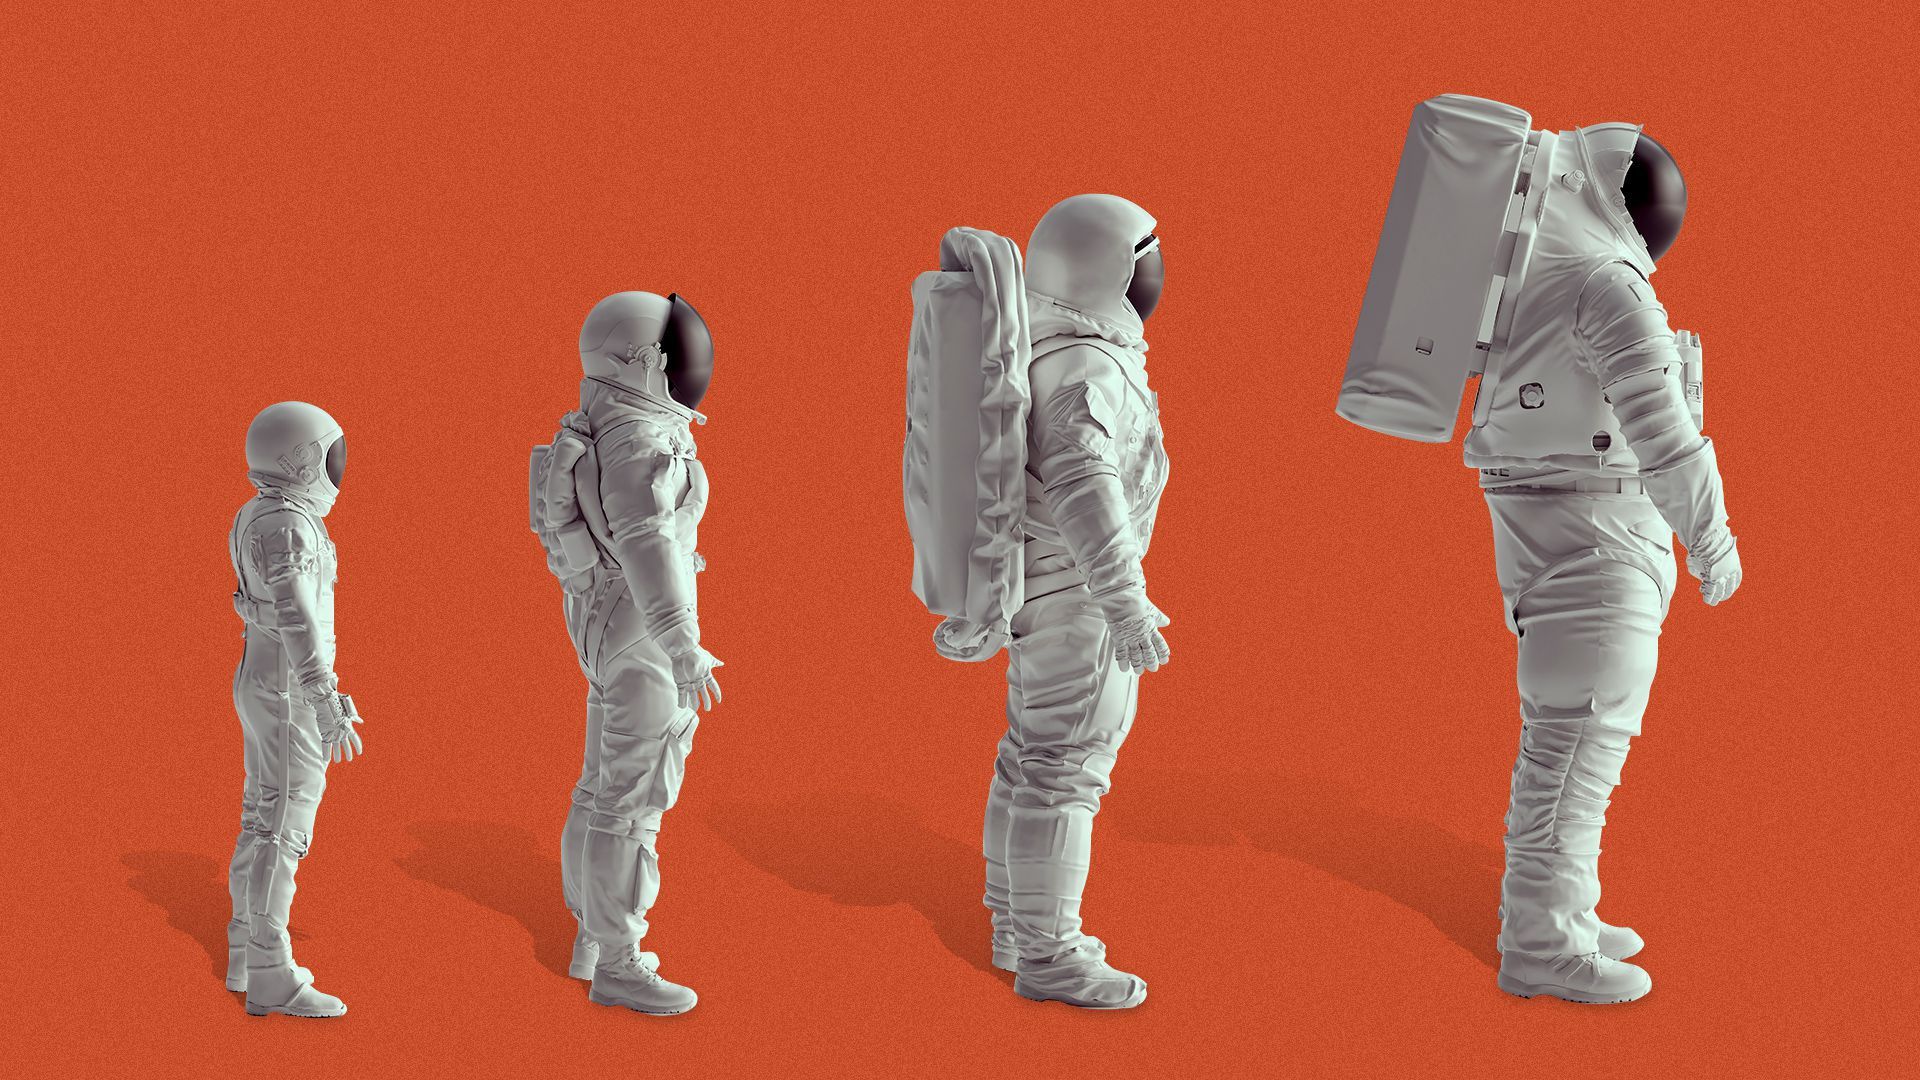 Growing people in space suits